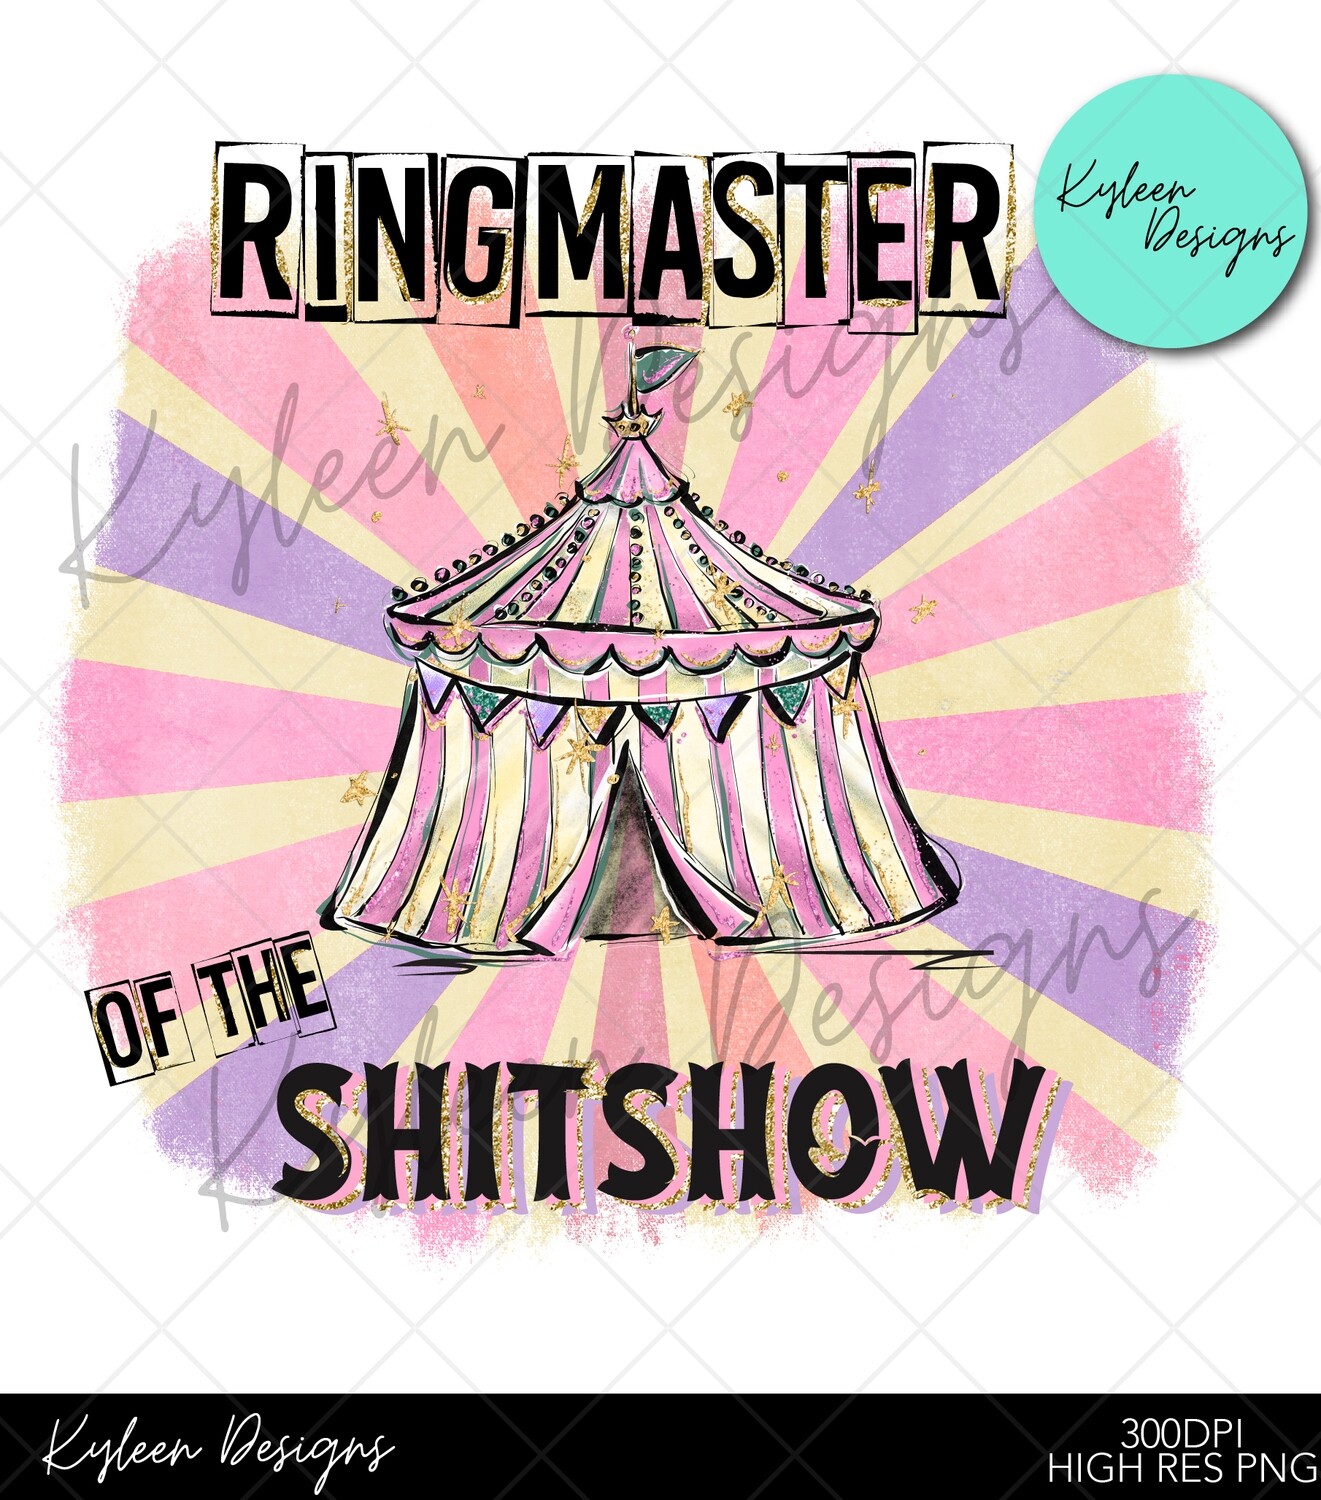 Ringmaster of the Shitshow for sublimation, waterslide High res PNG digital file